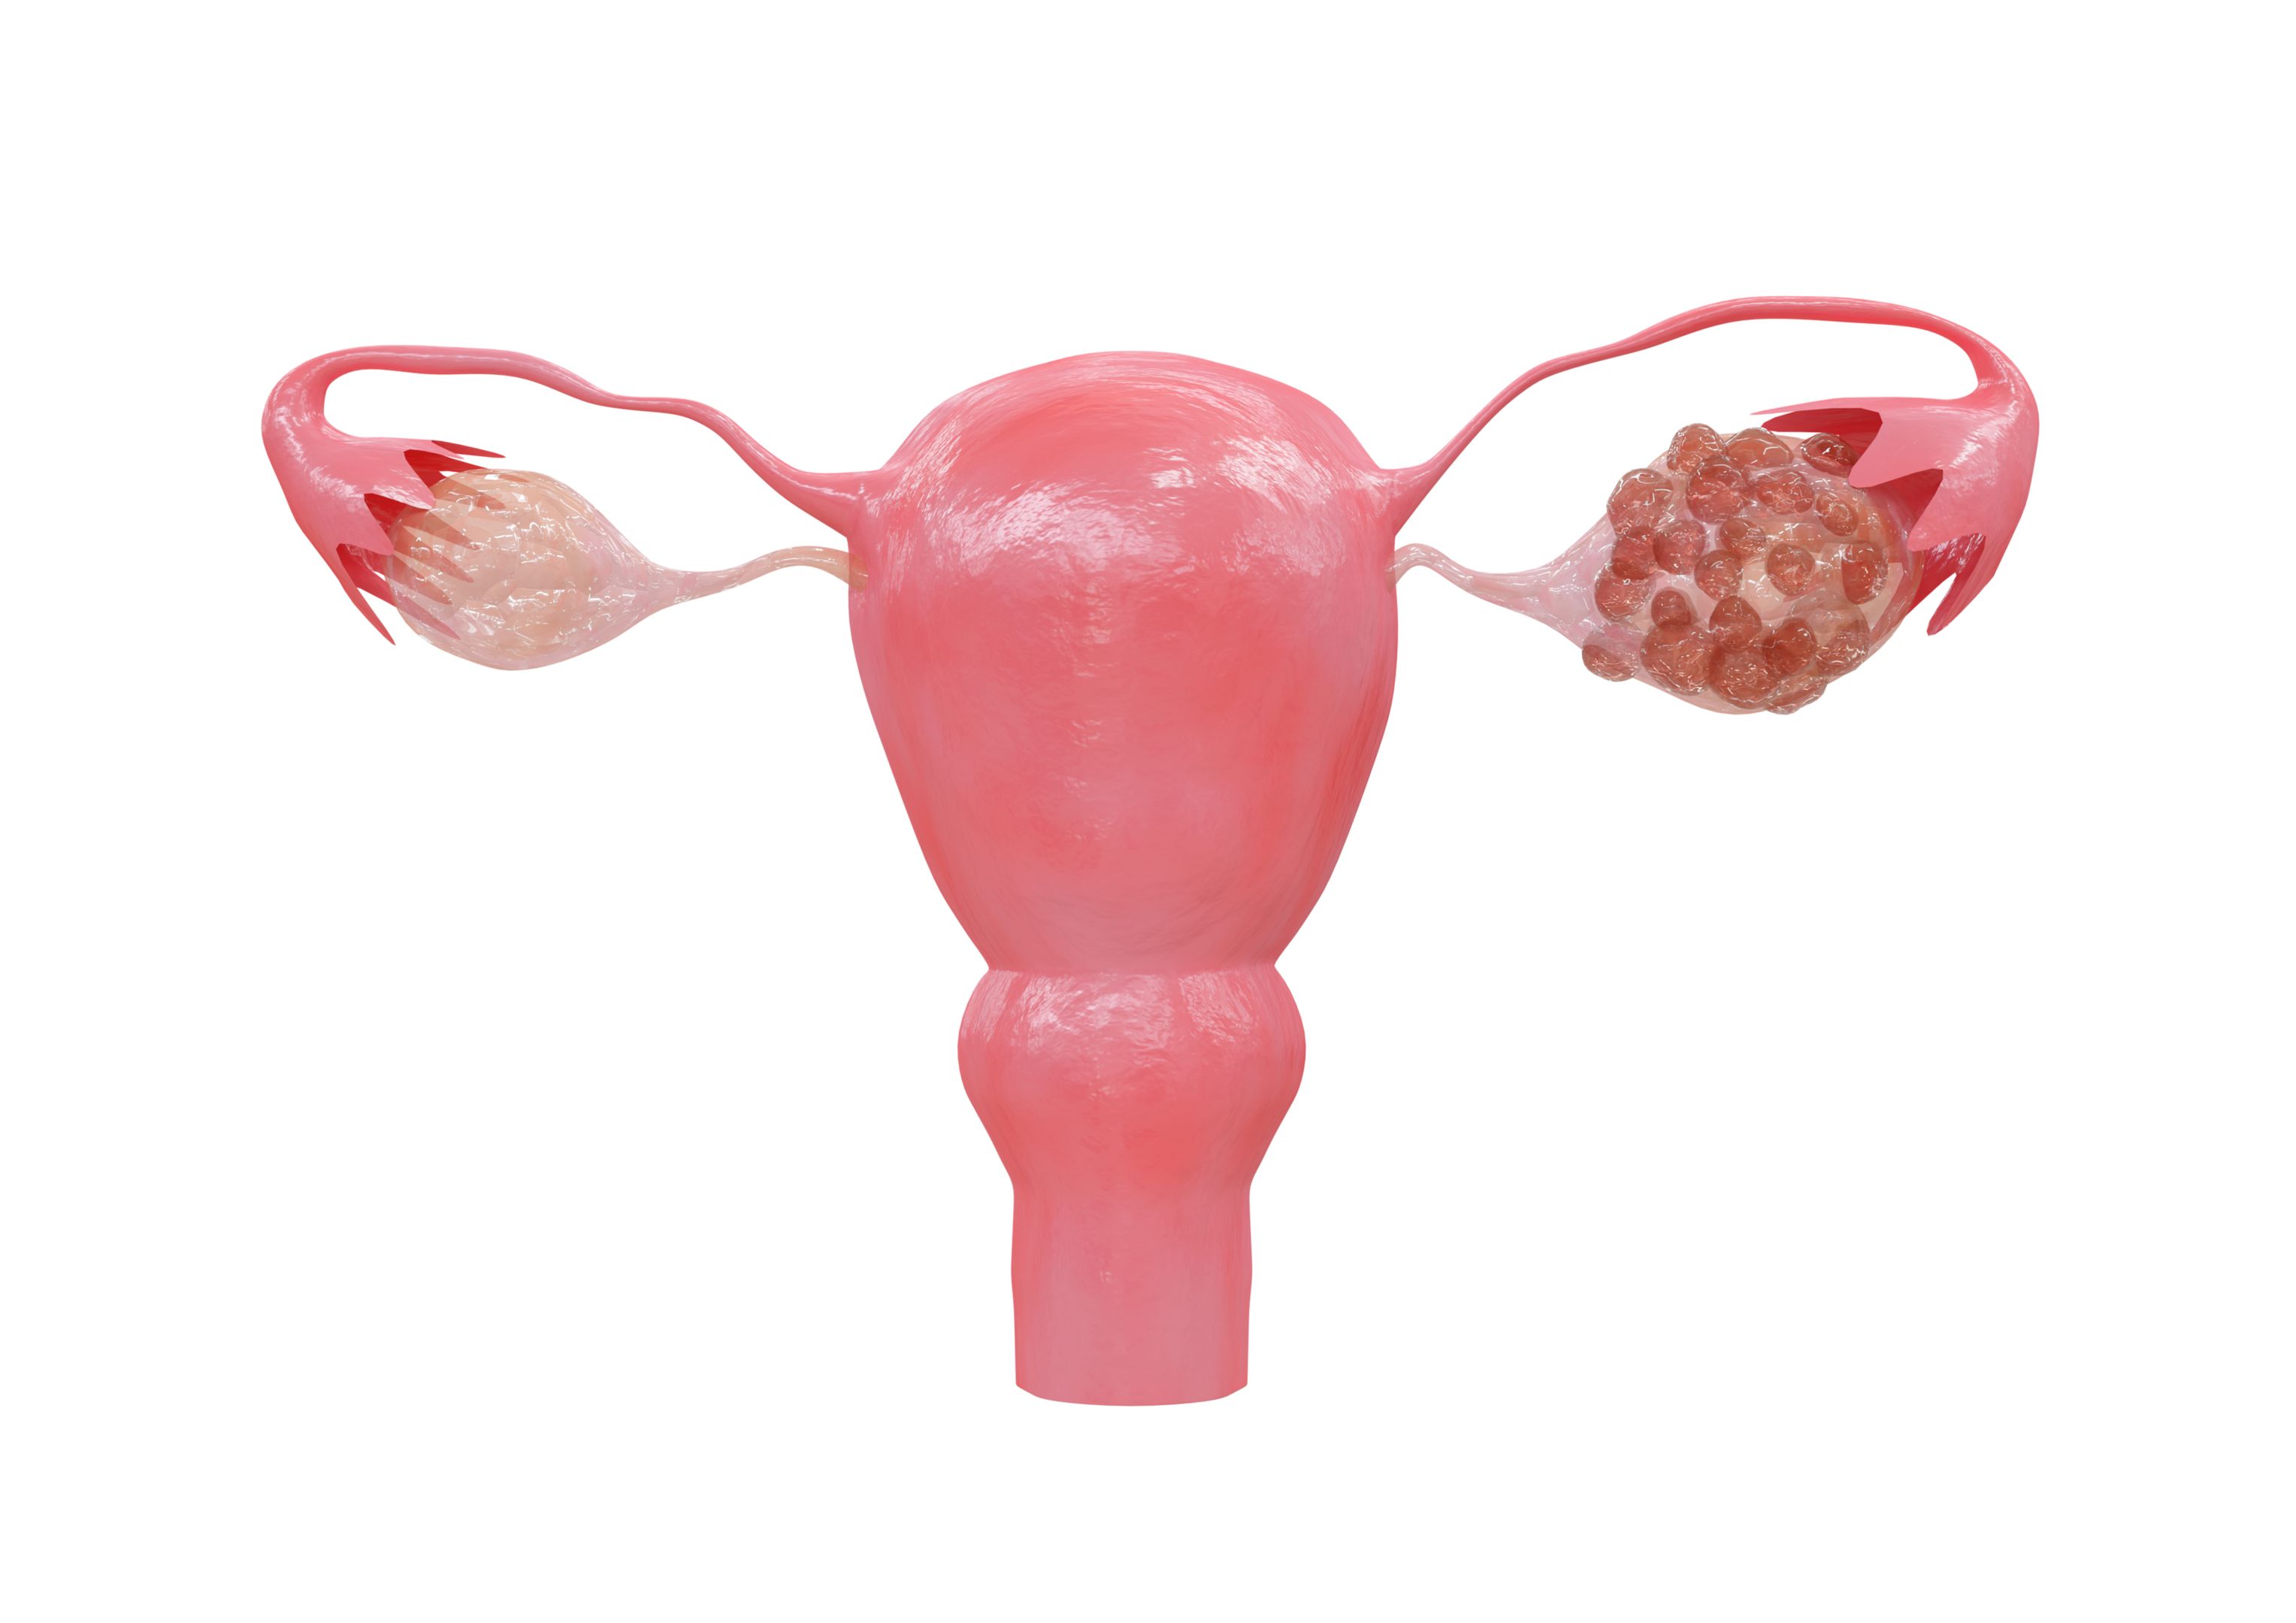 Just like ovaries, the vagina can also develop cysts.